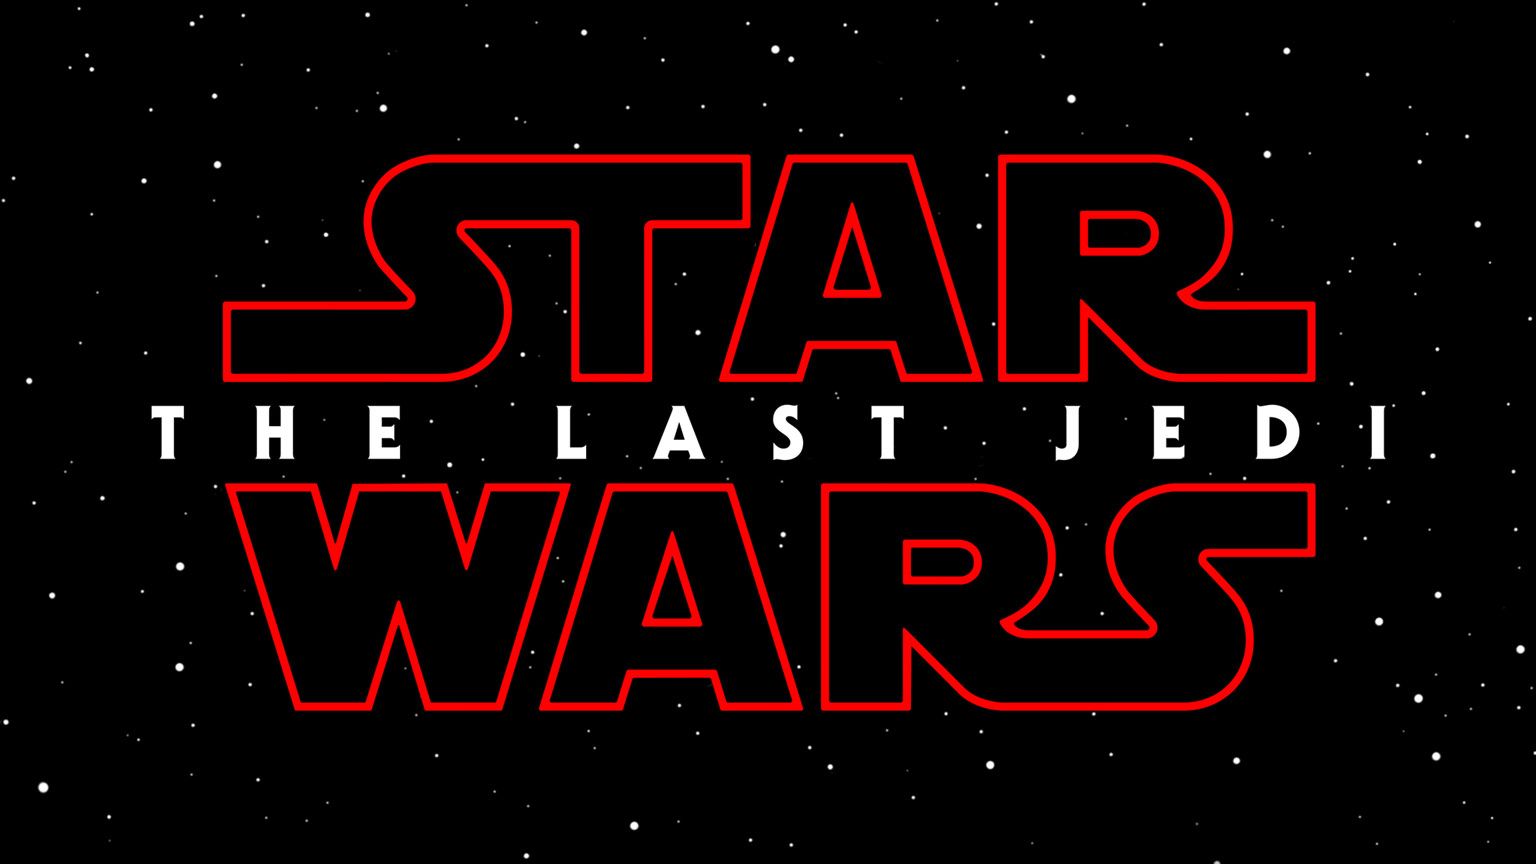 WATCH: Behind The Scenes Footage From Star Wars: Last Jedi